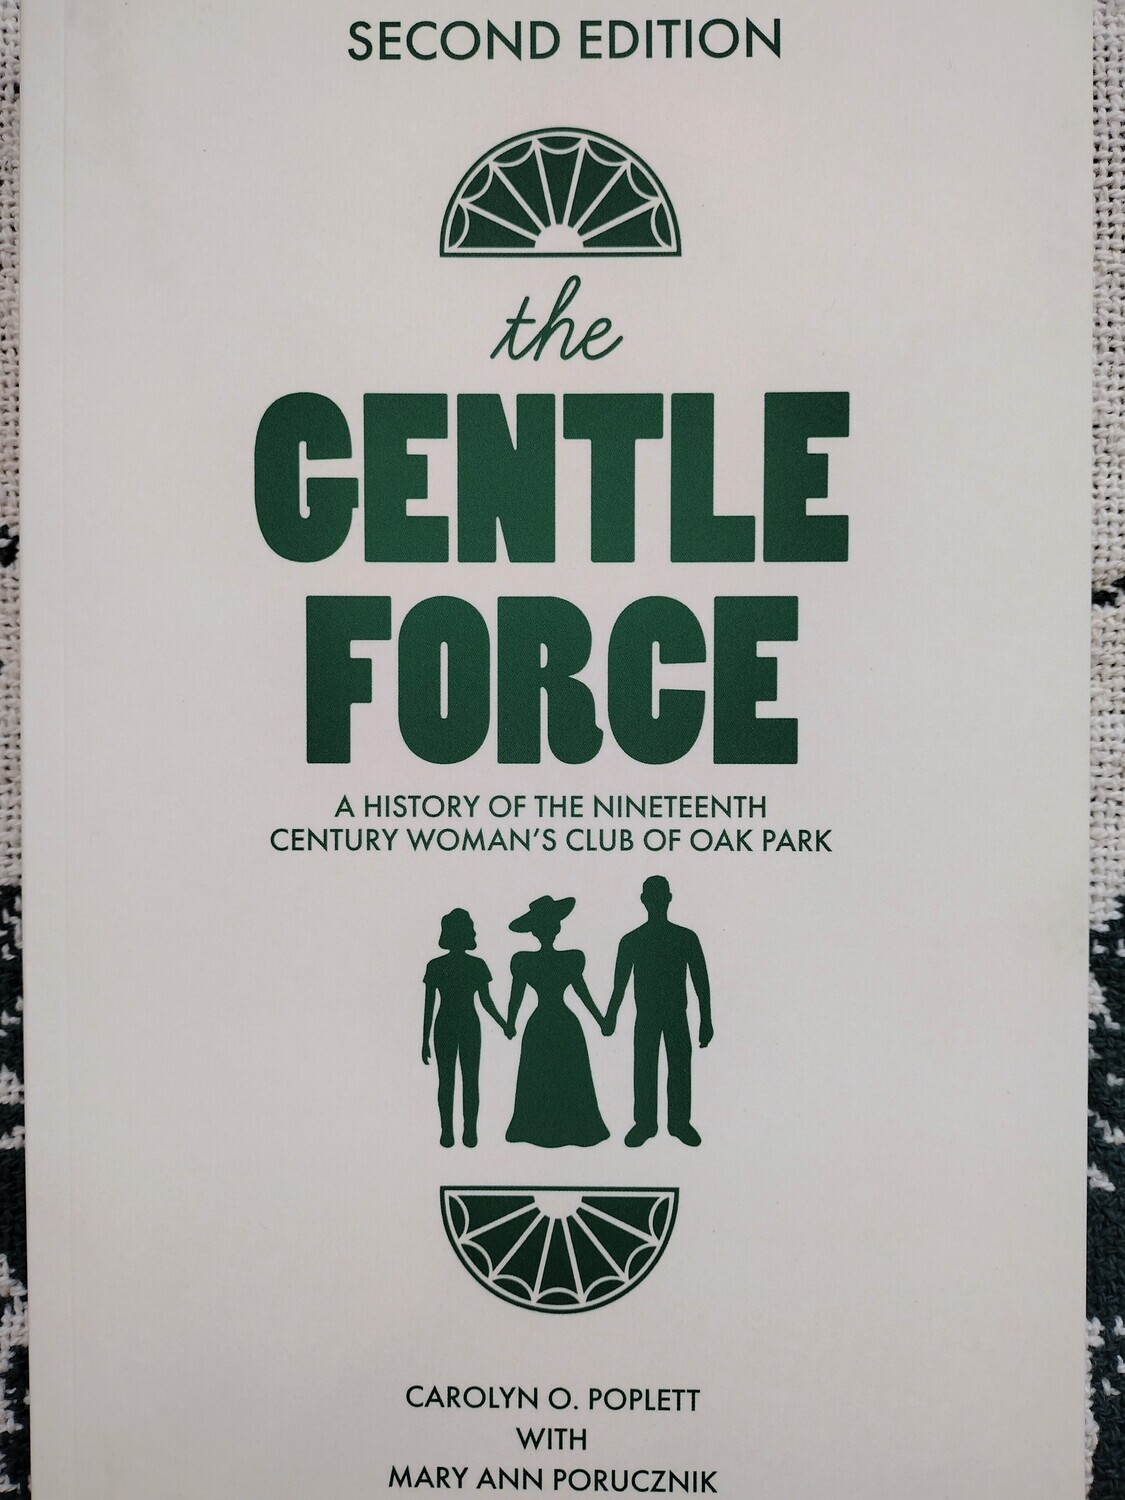 The Gentle Force: A History of the Nineteenth Century Women's Club of Oak Park